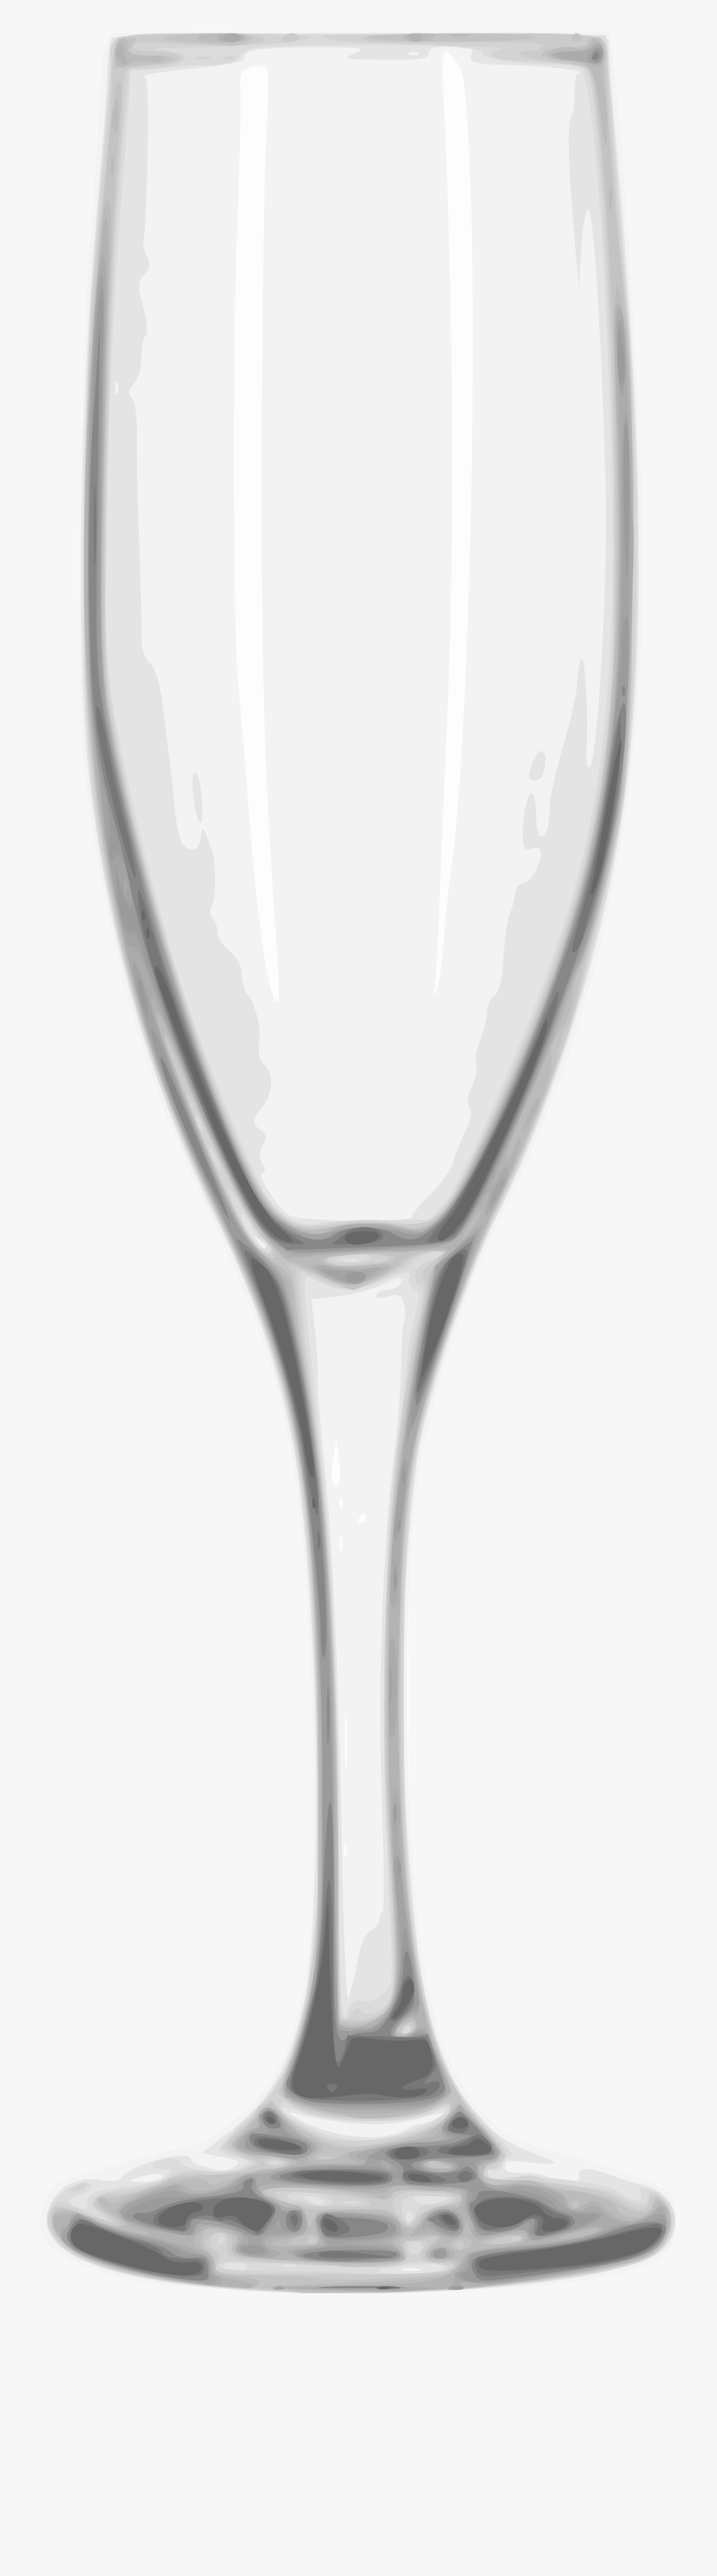 Transparent Champagne Glass Clipart Black And White - Champagne Flute Glass Png, Transparent Clipart